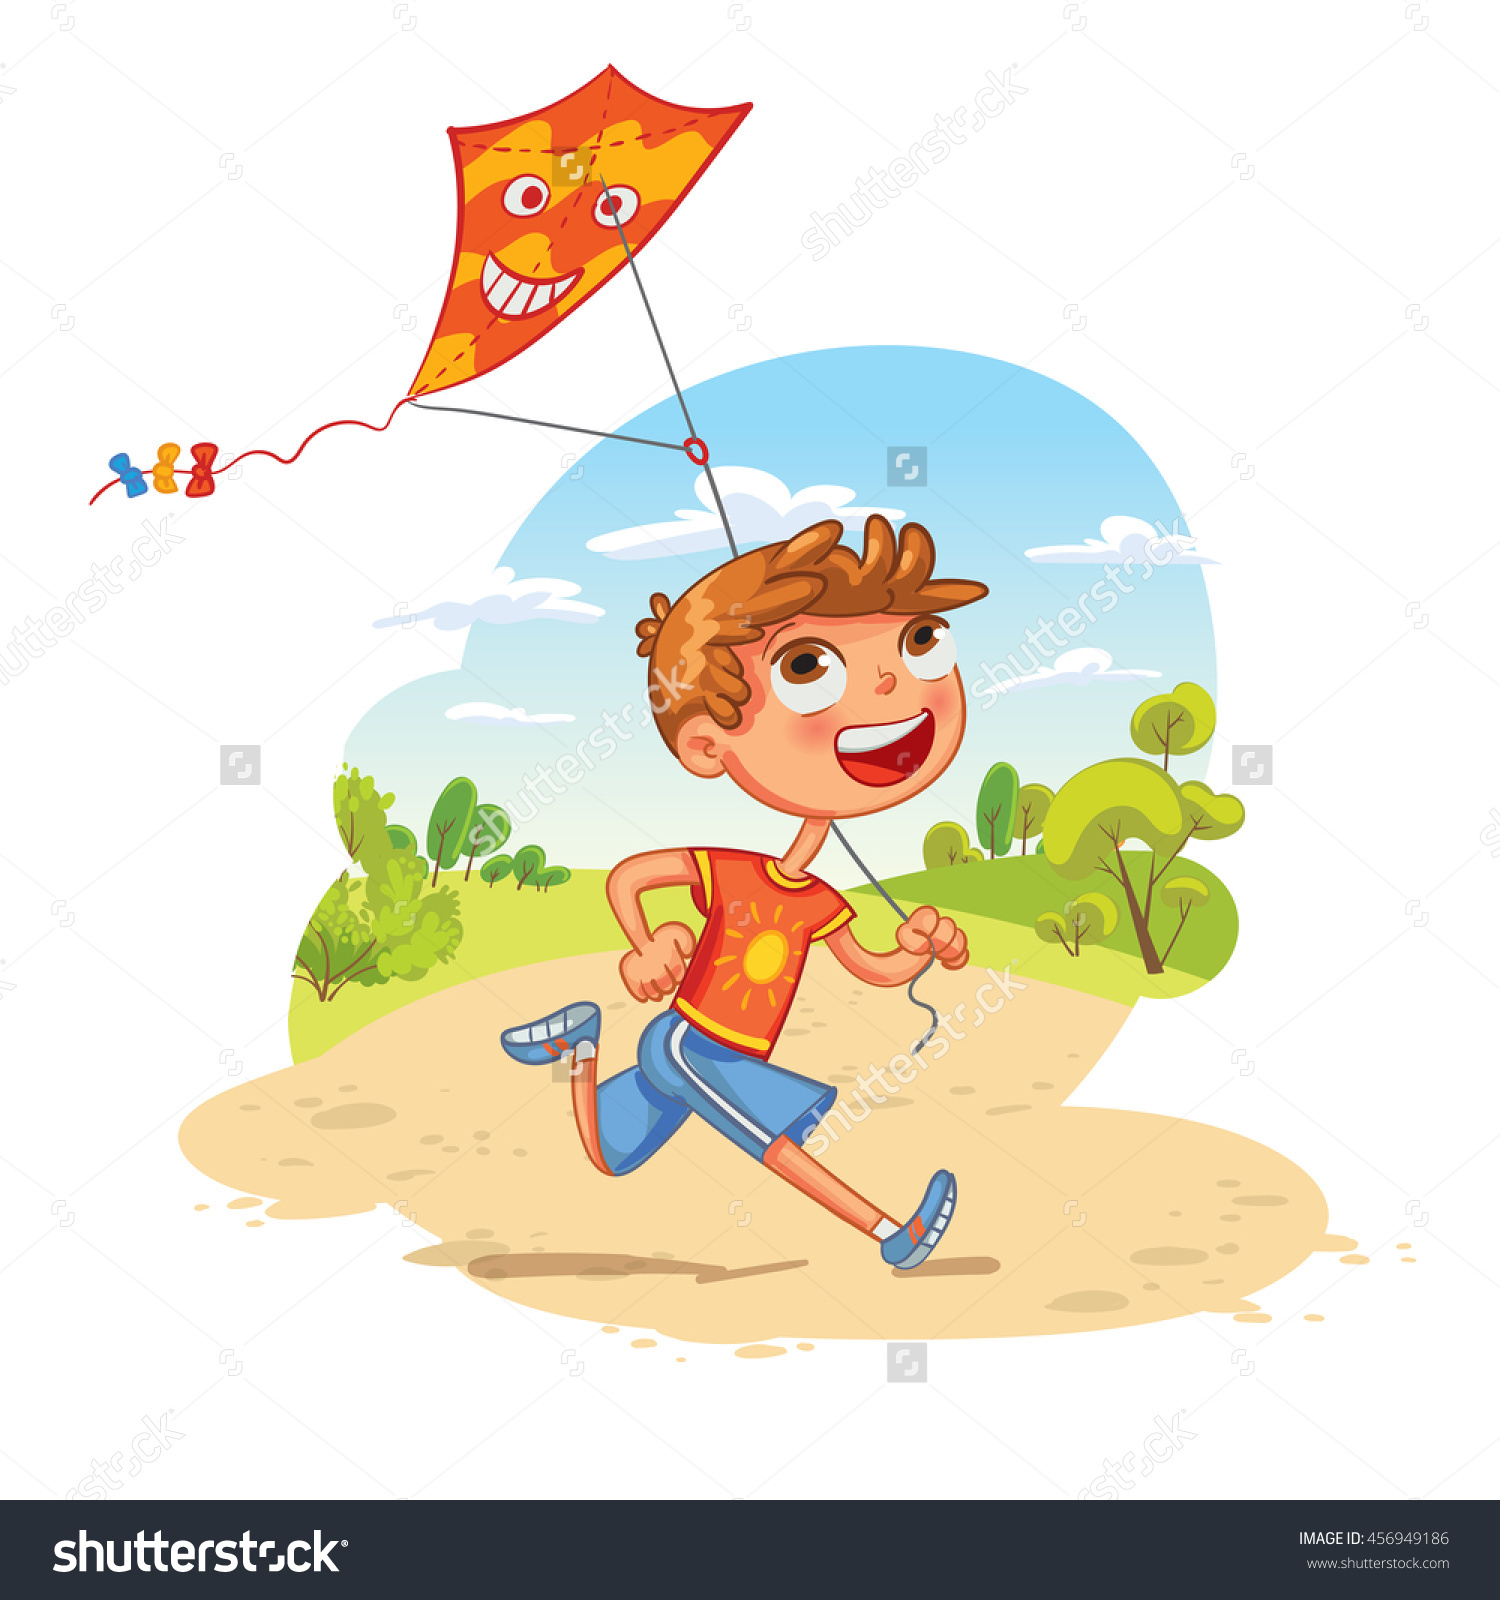 Boy Plays With A Kite In The Park. Funny Cartoon Character. Vector ...